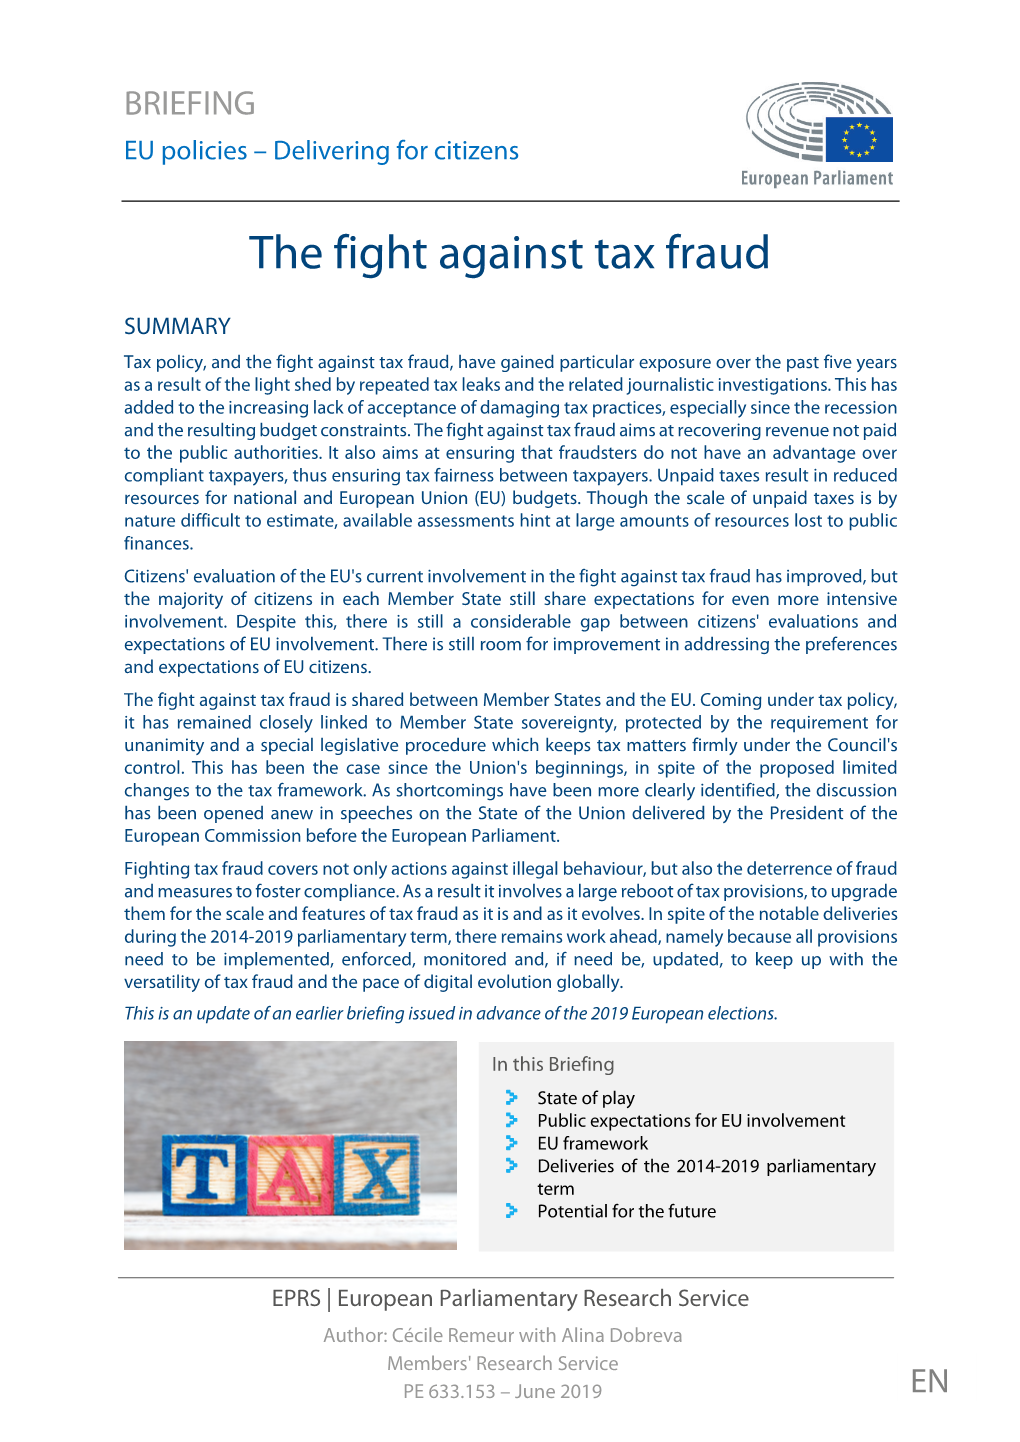 The Fight Against Tax Fraud